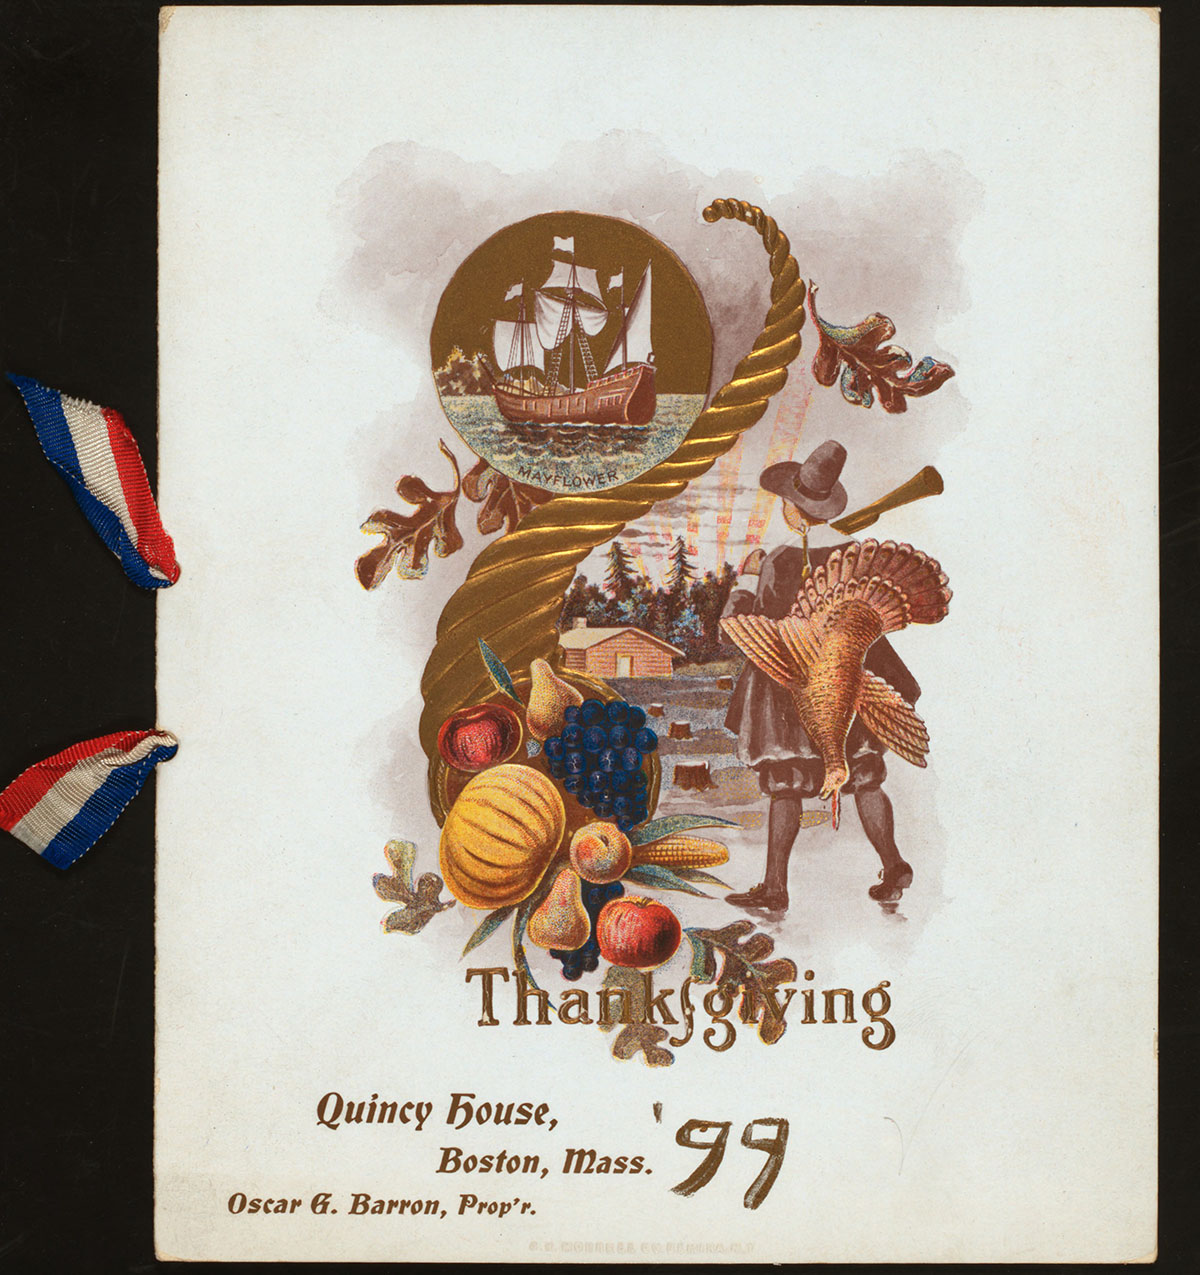 The cover of the Thanksgiving menu at Quincy House from 1899. / Image via the New York Public Library